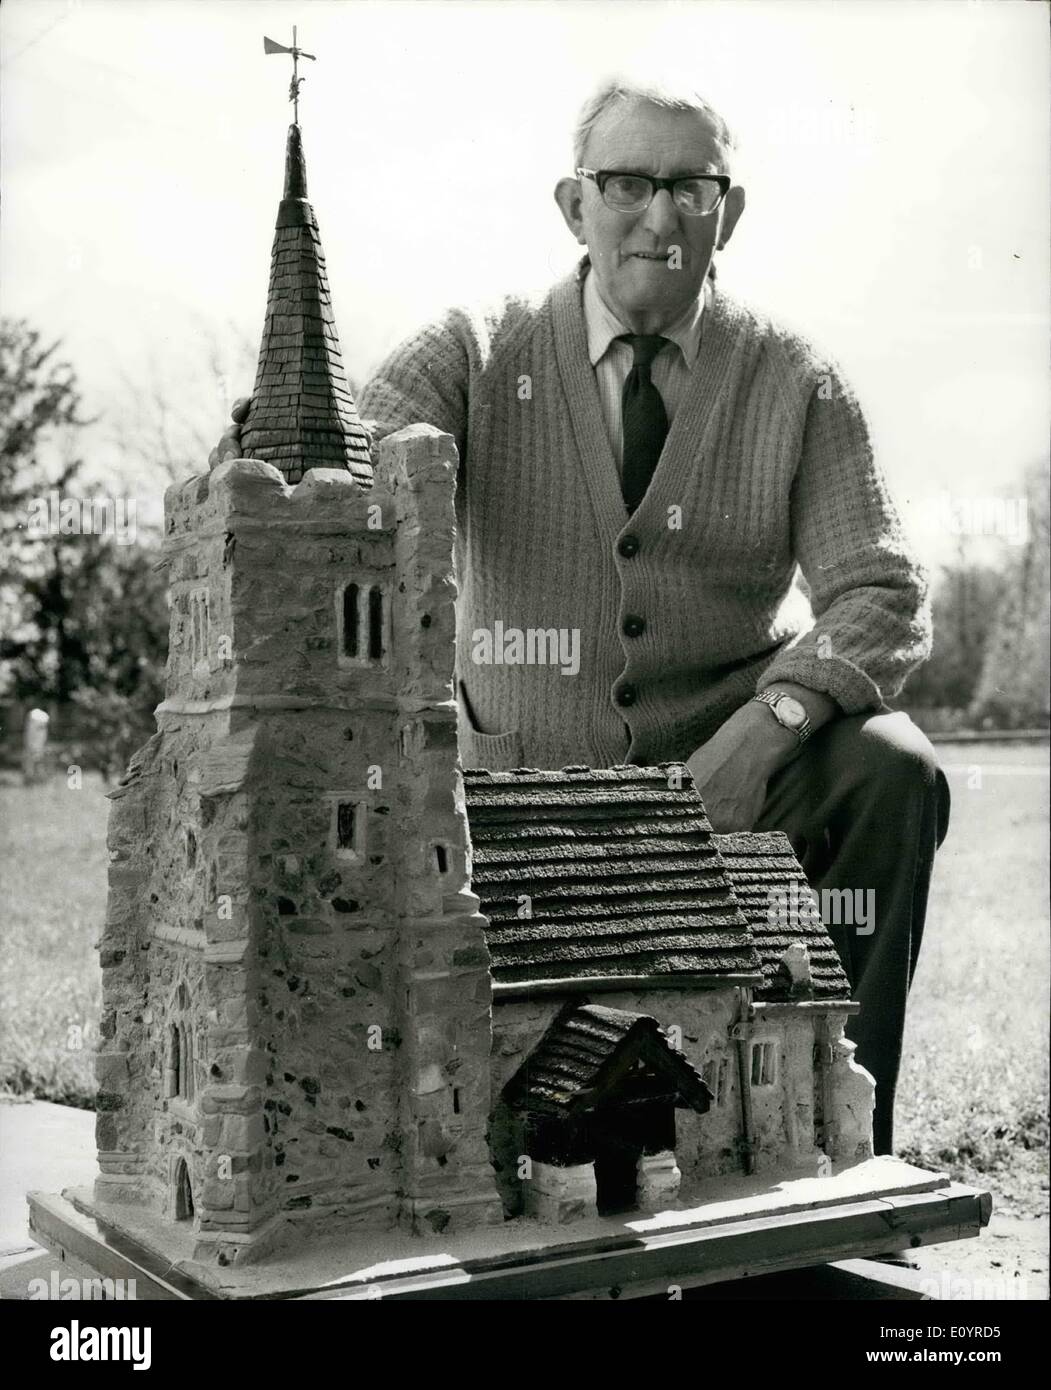 Apr. 04, 1971 - Model Church made form the war time stone from the bombed House of Commons: A model of a church has been made from stone taken from the Houses of Common which was bombed during world war two. the builder 10 Ted Truss who likes to do thing in a small way. But he gets big idears like shaping an exact stone replica of Little Wakering Church, Essex/ The result , as you can see, is a tiny marvel. The model is three feet high and aven has a font, pulpit, altar and rowa of pews inside Stock Photo